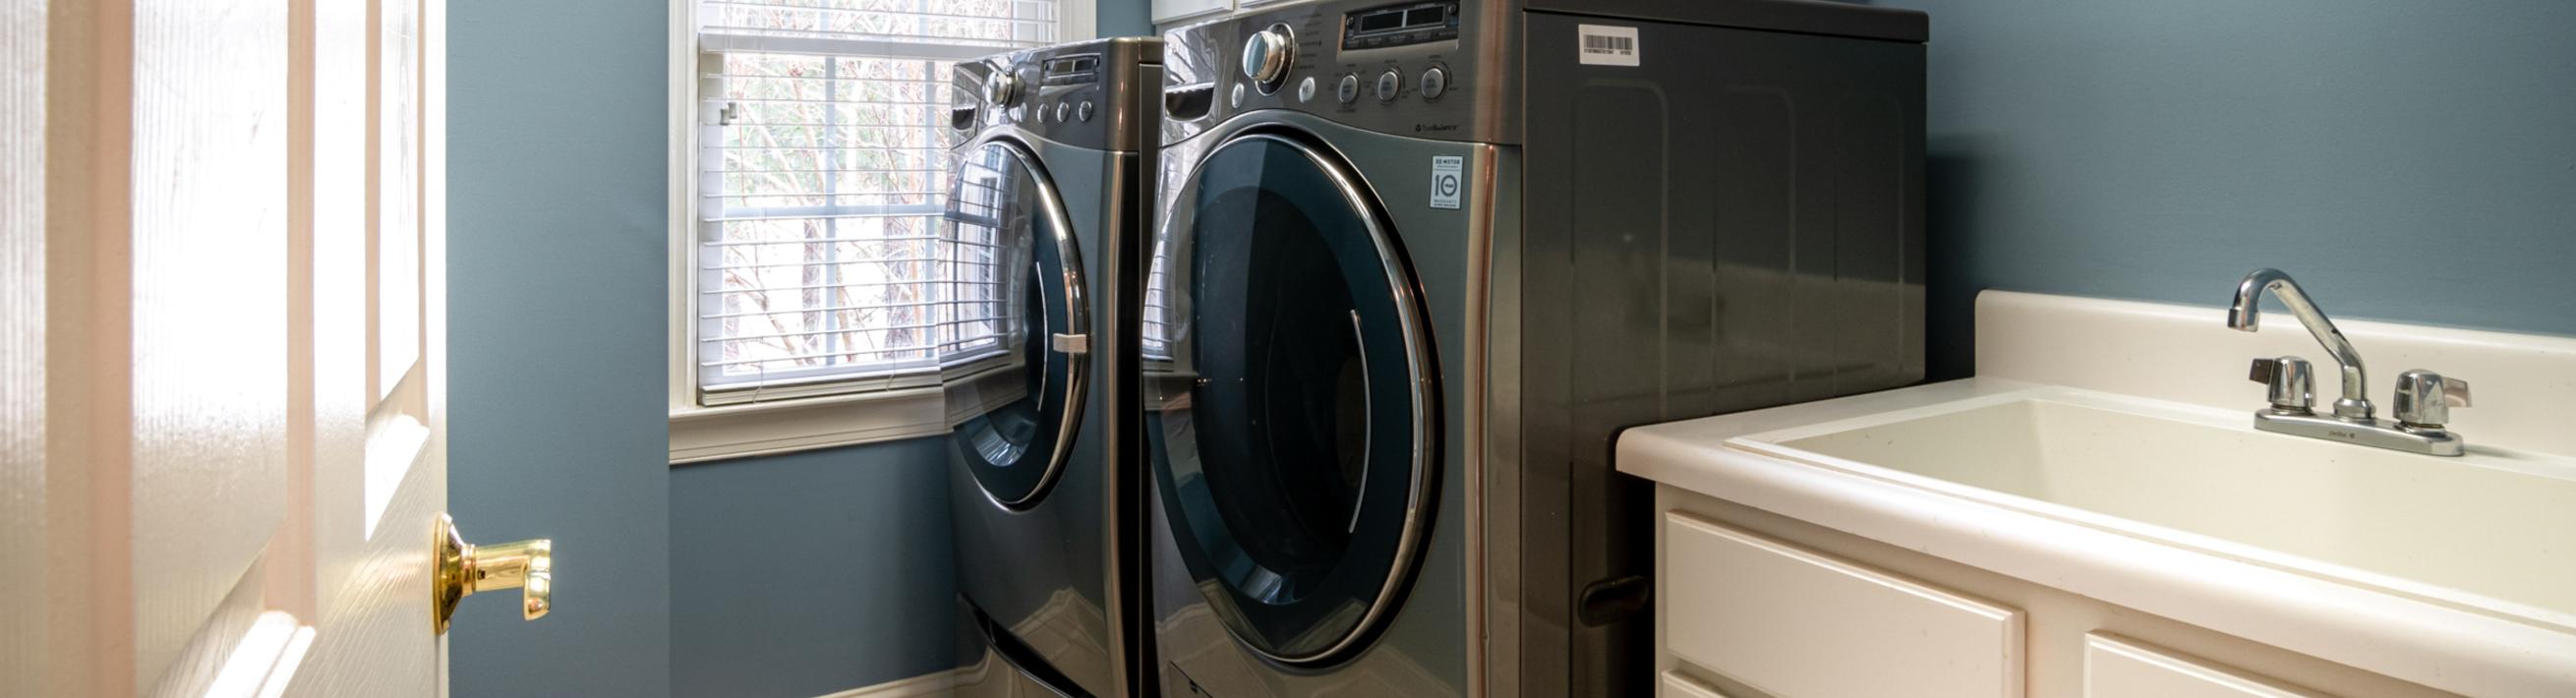 A washing machine and clothes dryer in a laundry room